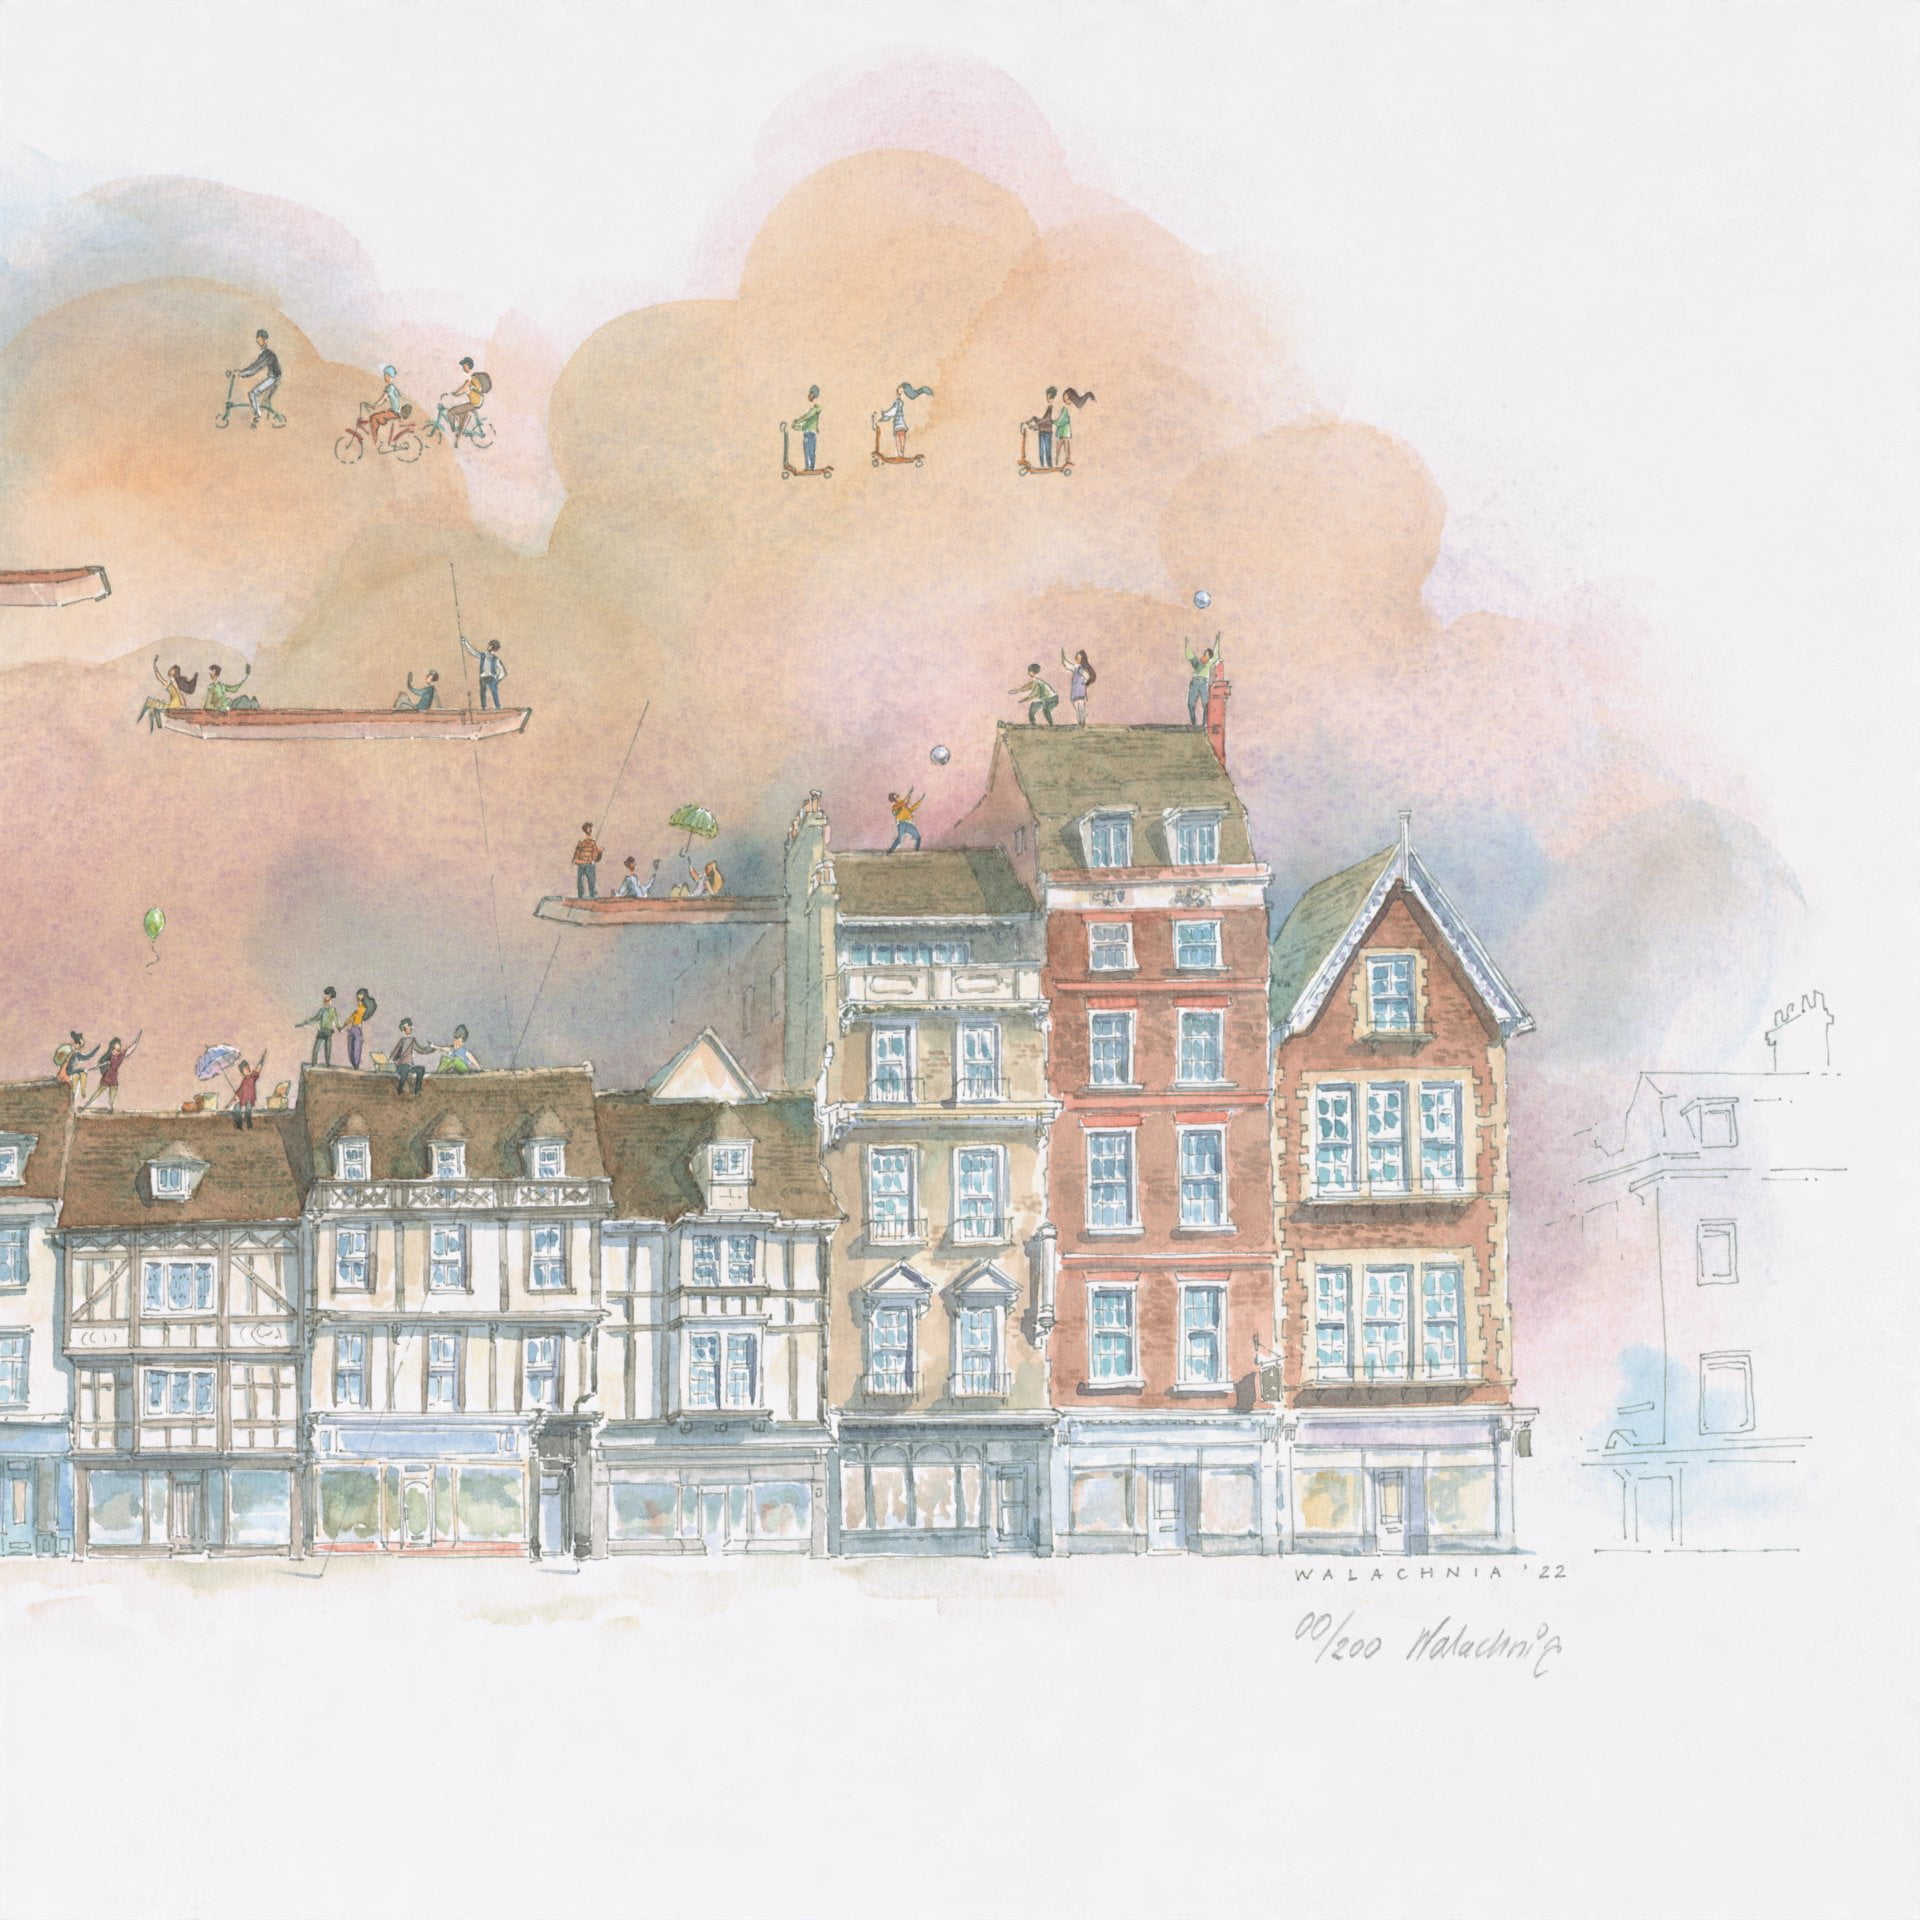 Limited Edition Print of King's Parade in Cambridge 